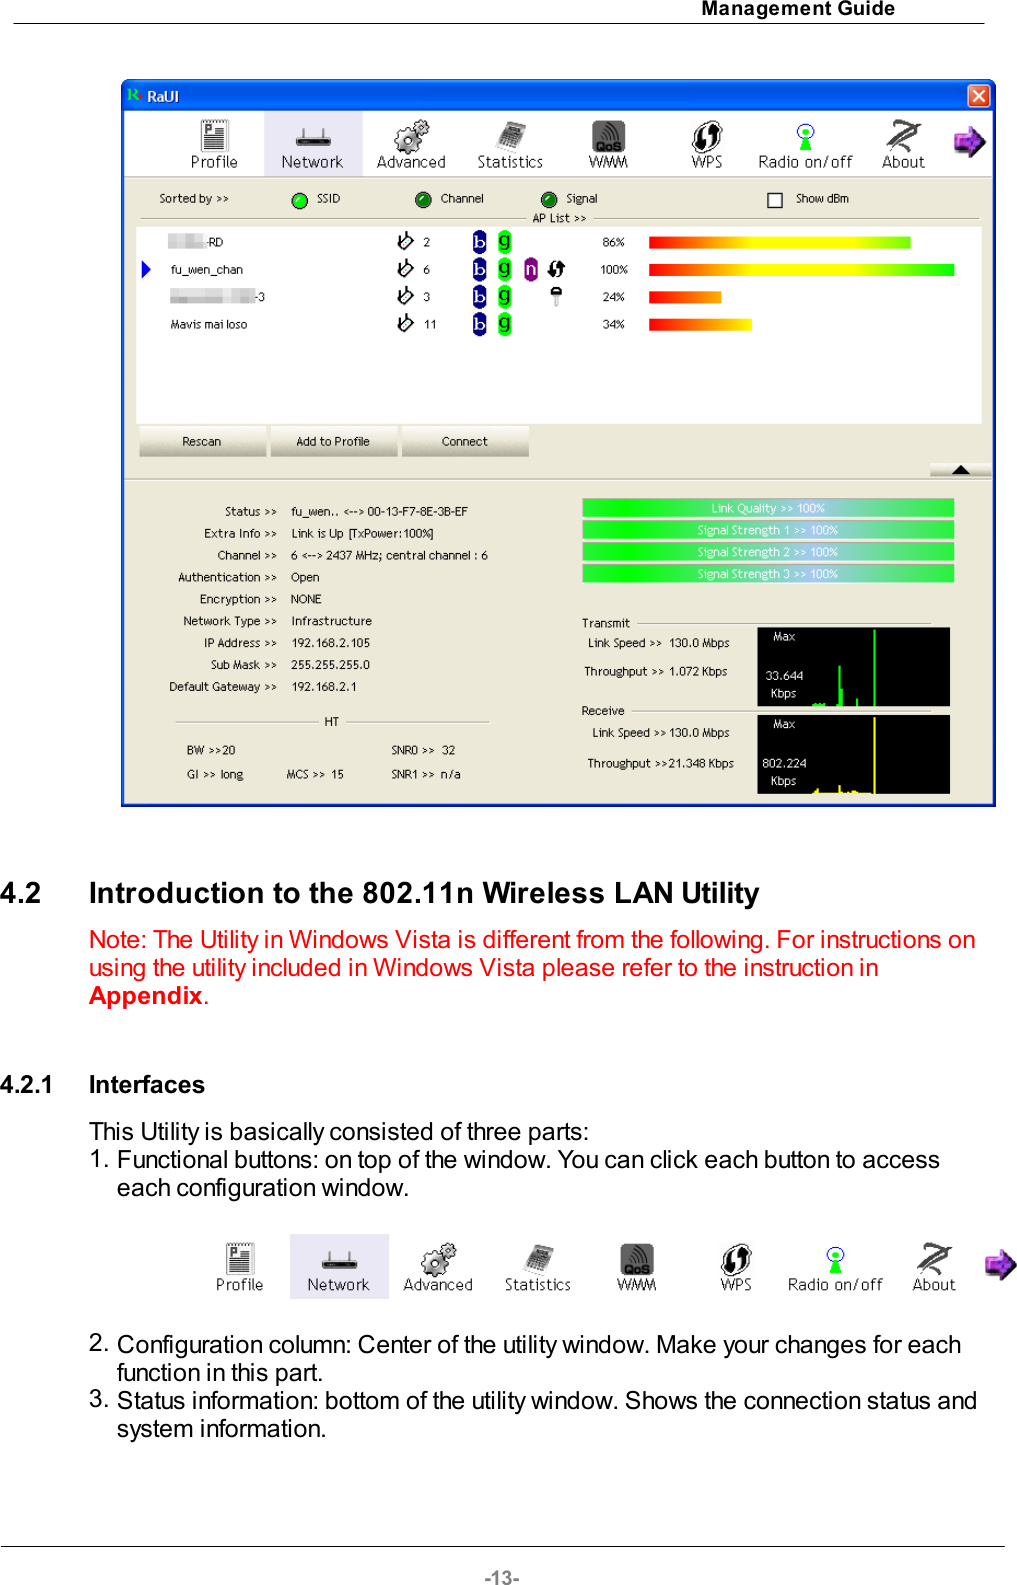 Management Guide-13-4.2 Introduction to the 802.11n Wireless LAN UtilityNote: The Utility in Windows Vista is different from the following. For instructions onusing the utility included in Windows Vista please refer to the instruction in Appendix.4.2.1 InterfacesThis Utility is basically consisted of three parts:1. Functional buttons: on top of the window. You can click each button to accesseach configuration window.2. Configuration column: Center of the utility window. Make your changes for eachfunction in this part.3. Status information: bottom of the utility window. Shows the connection status andsystem information.